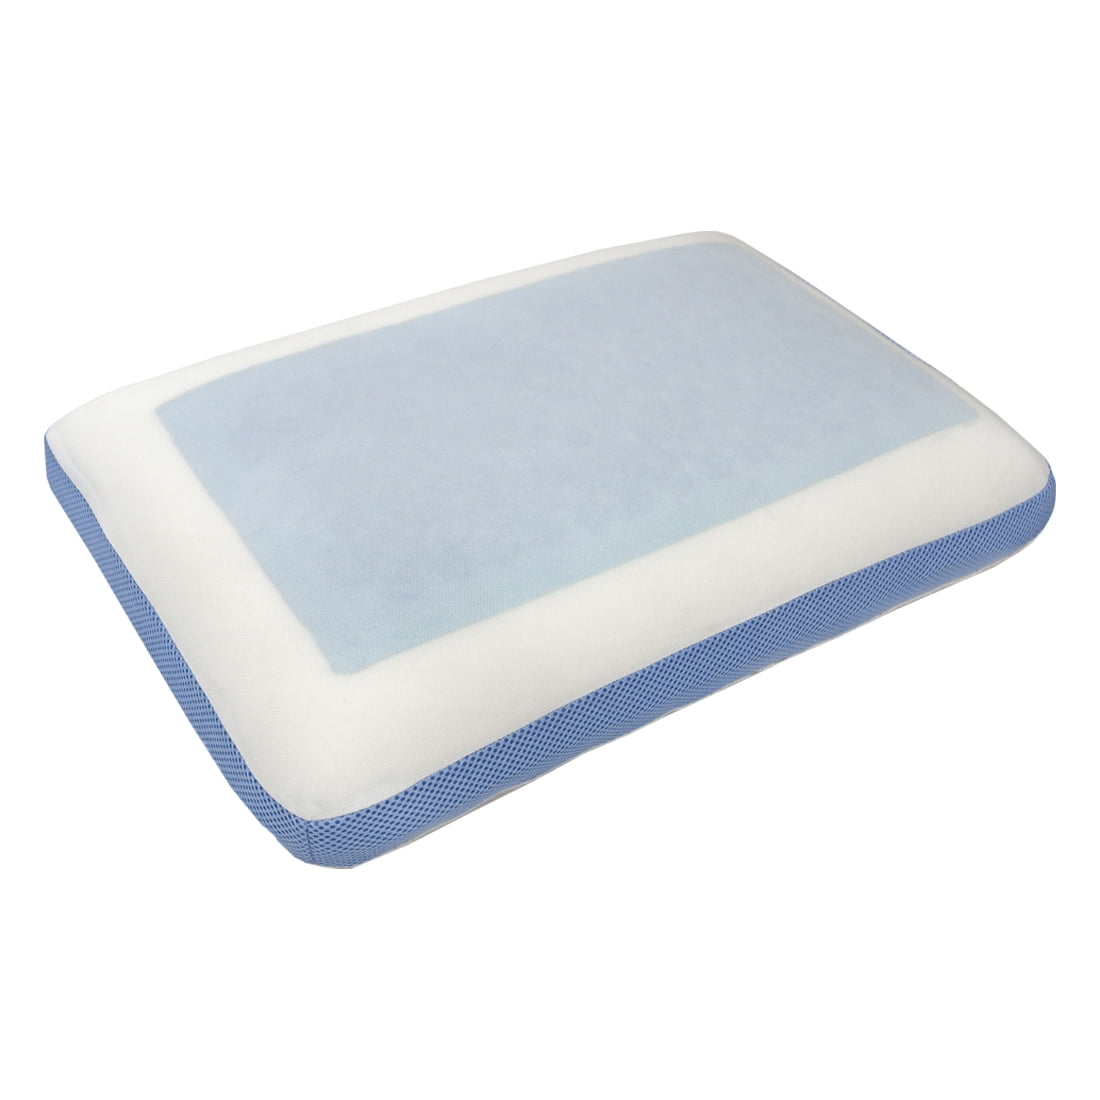 helps you keep cool BAMBOO CONTOURED MEMORY FOAM COOLING GEL PILLOW 